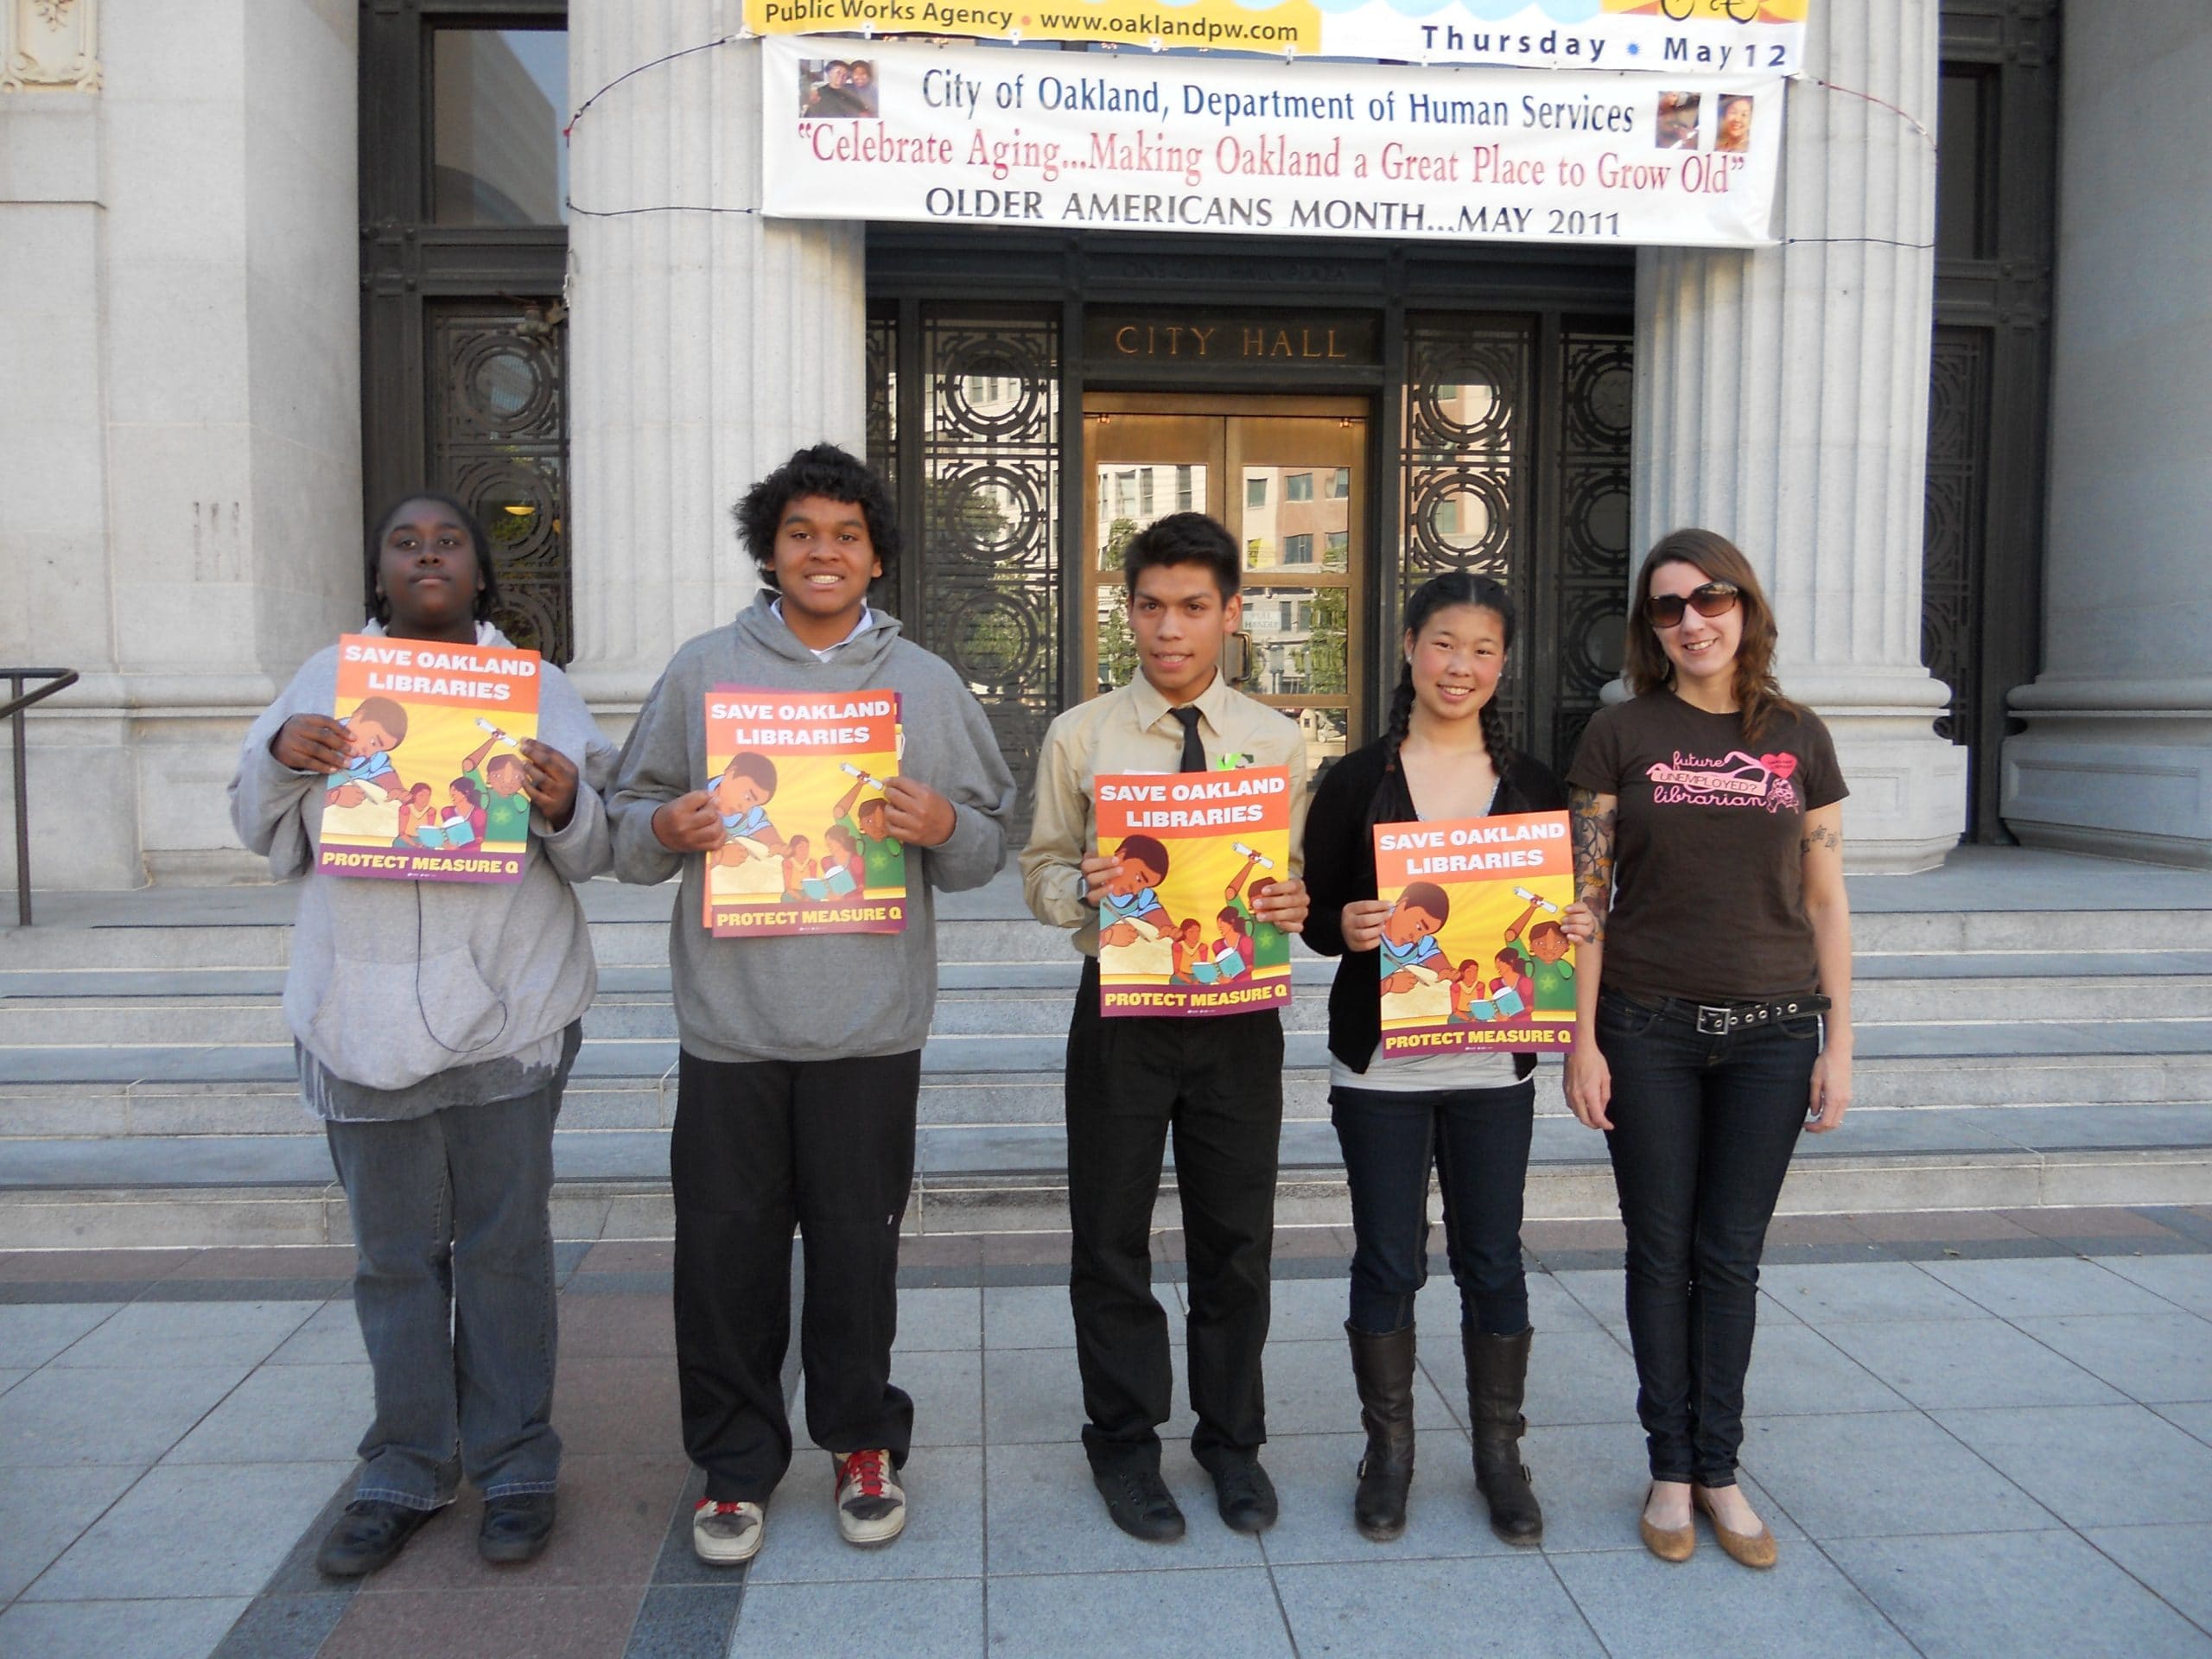 YLC with Save Oakland Libraries signs